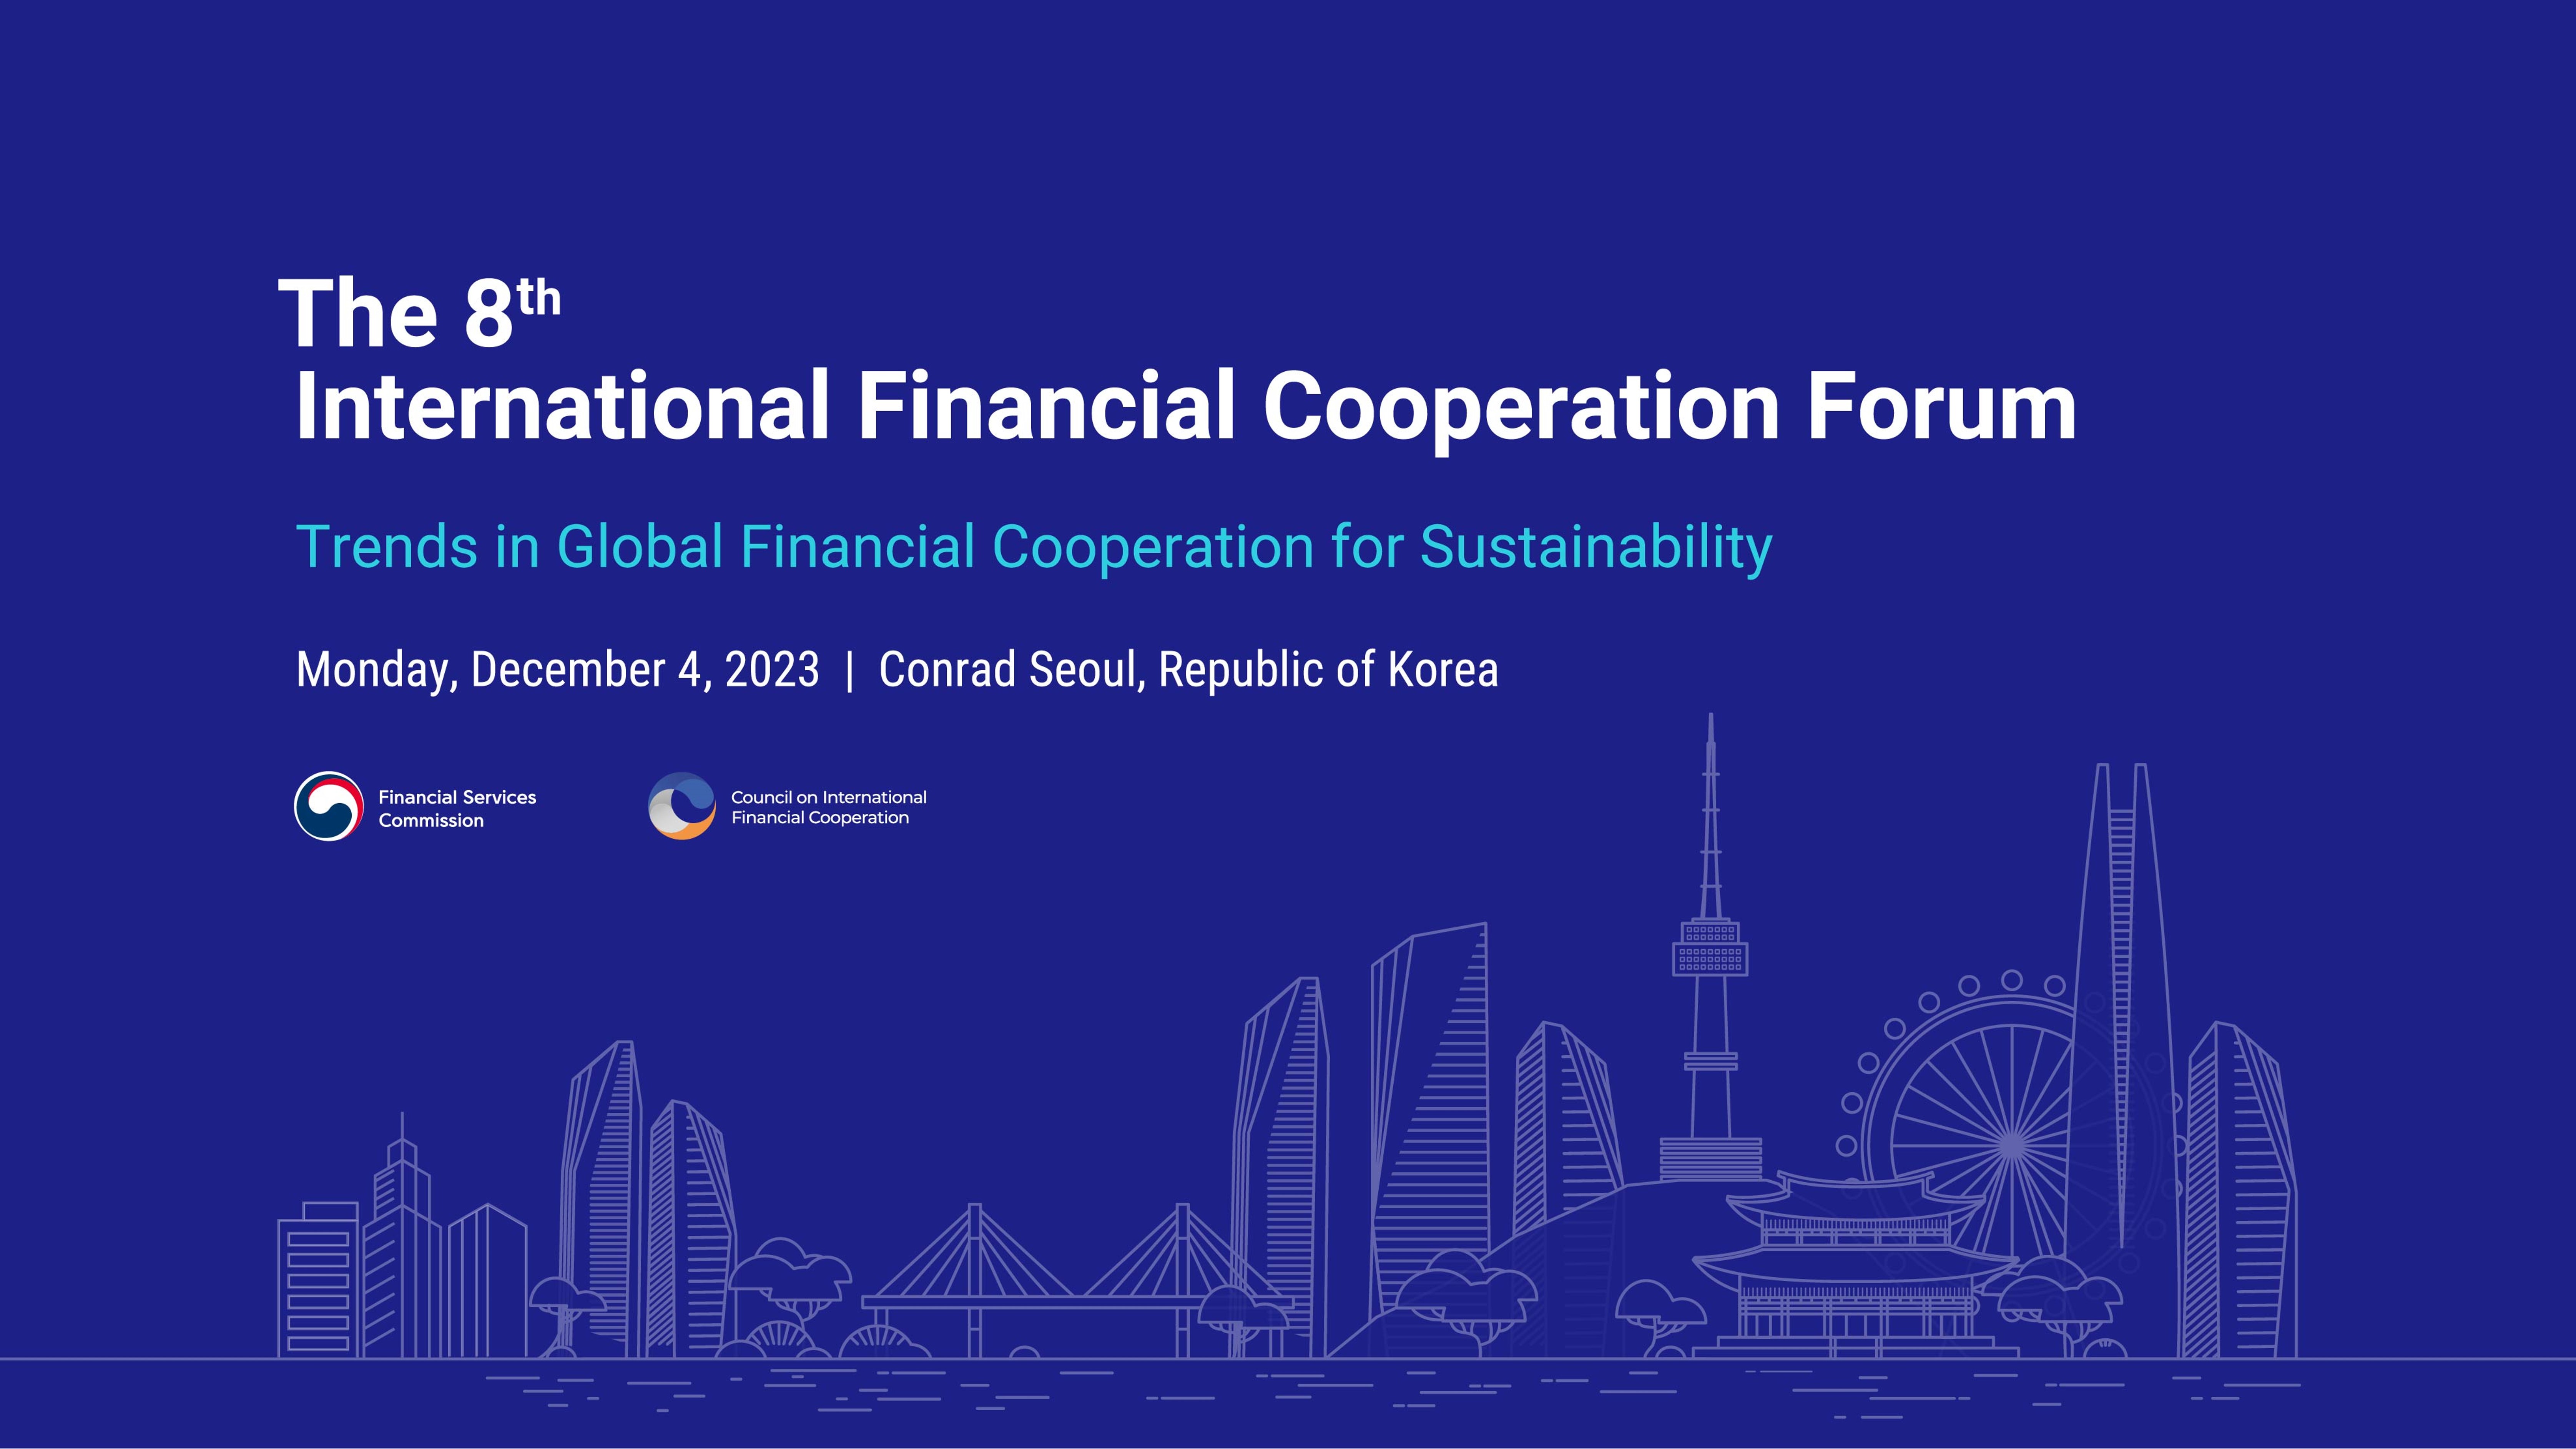 The 8th International Financial Cooperation Forum